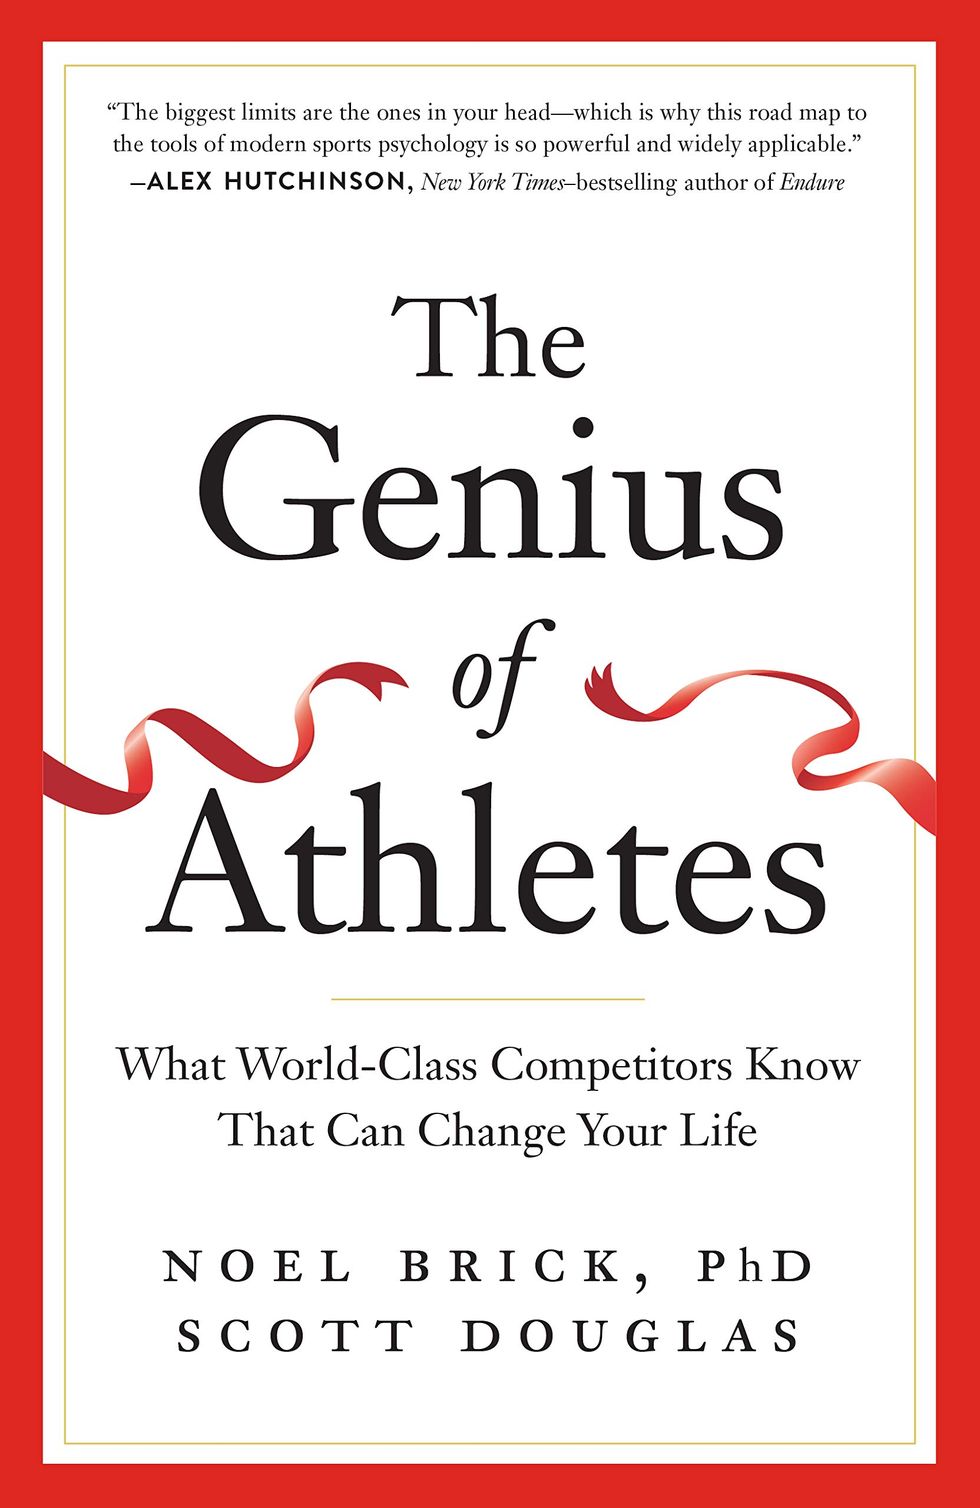 'The Genius of Athletes: What World-Class Competitors Know That Can Change Your Life' by Noel Brick and Scott Douglas